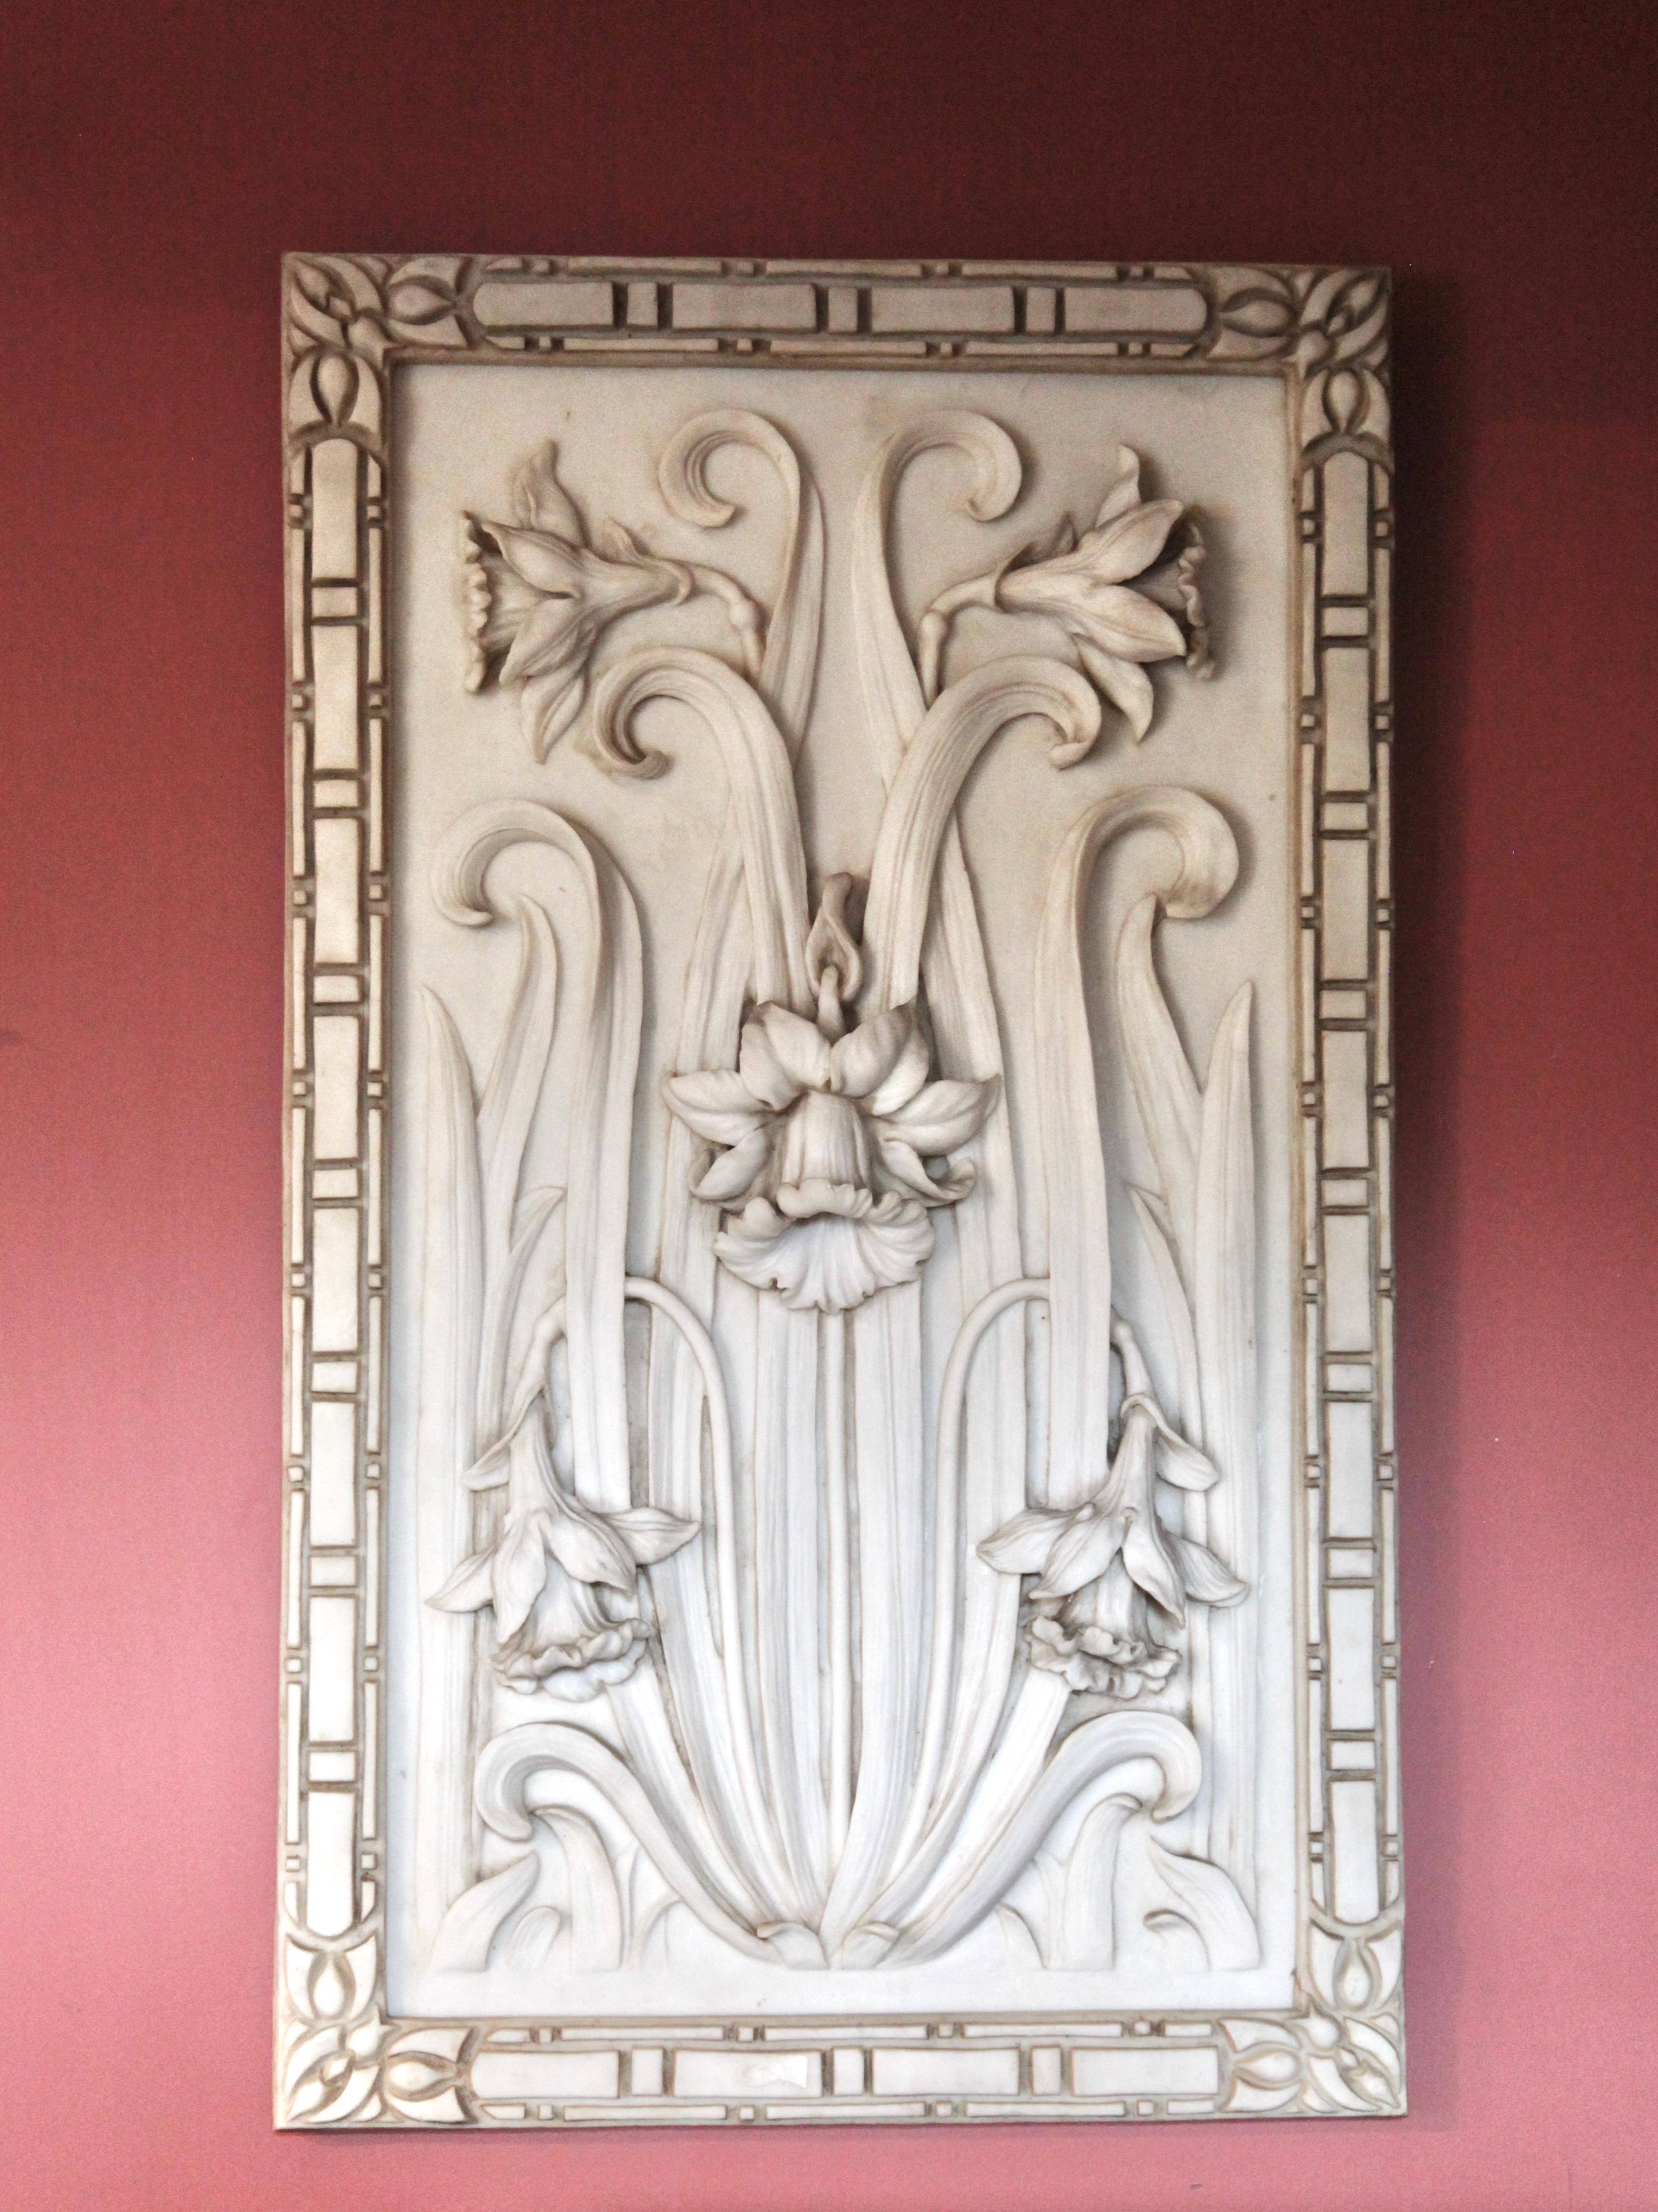 Large decorative alabaster panel with Art Nouveau design. Dramatic high-relief sculpture of daffodils (Jonquils) with leaves and flower heads in 3-D. Such items were typically used as decorative panels in the home. The alabaster has a light cream